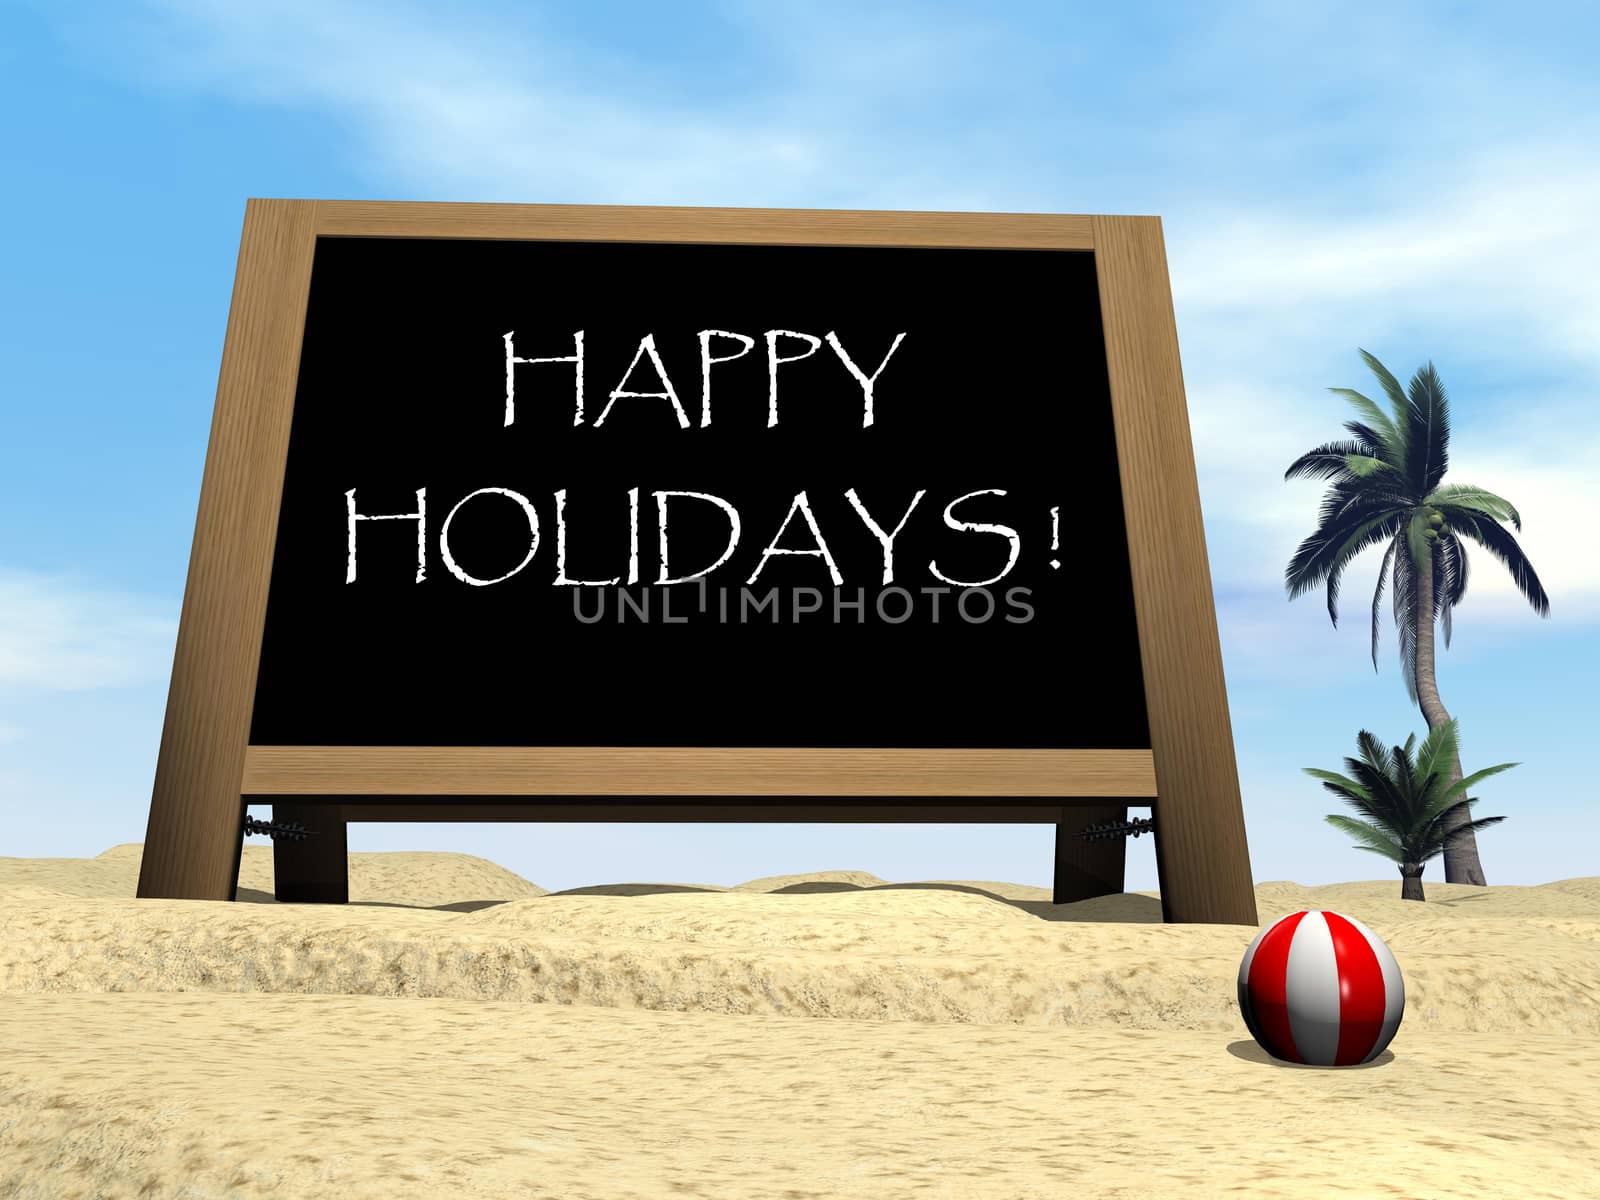 Happy holidays message at the beach - 3D render